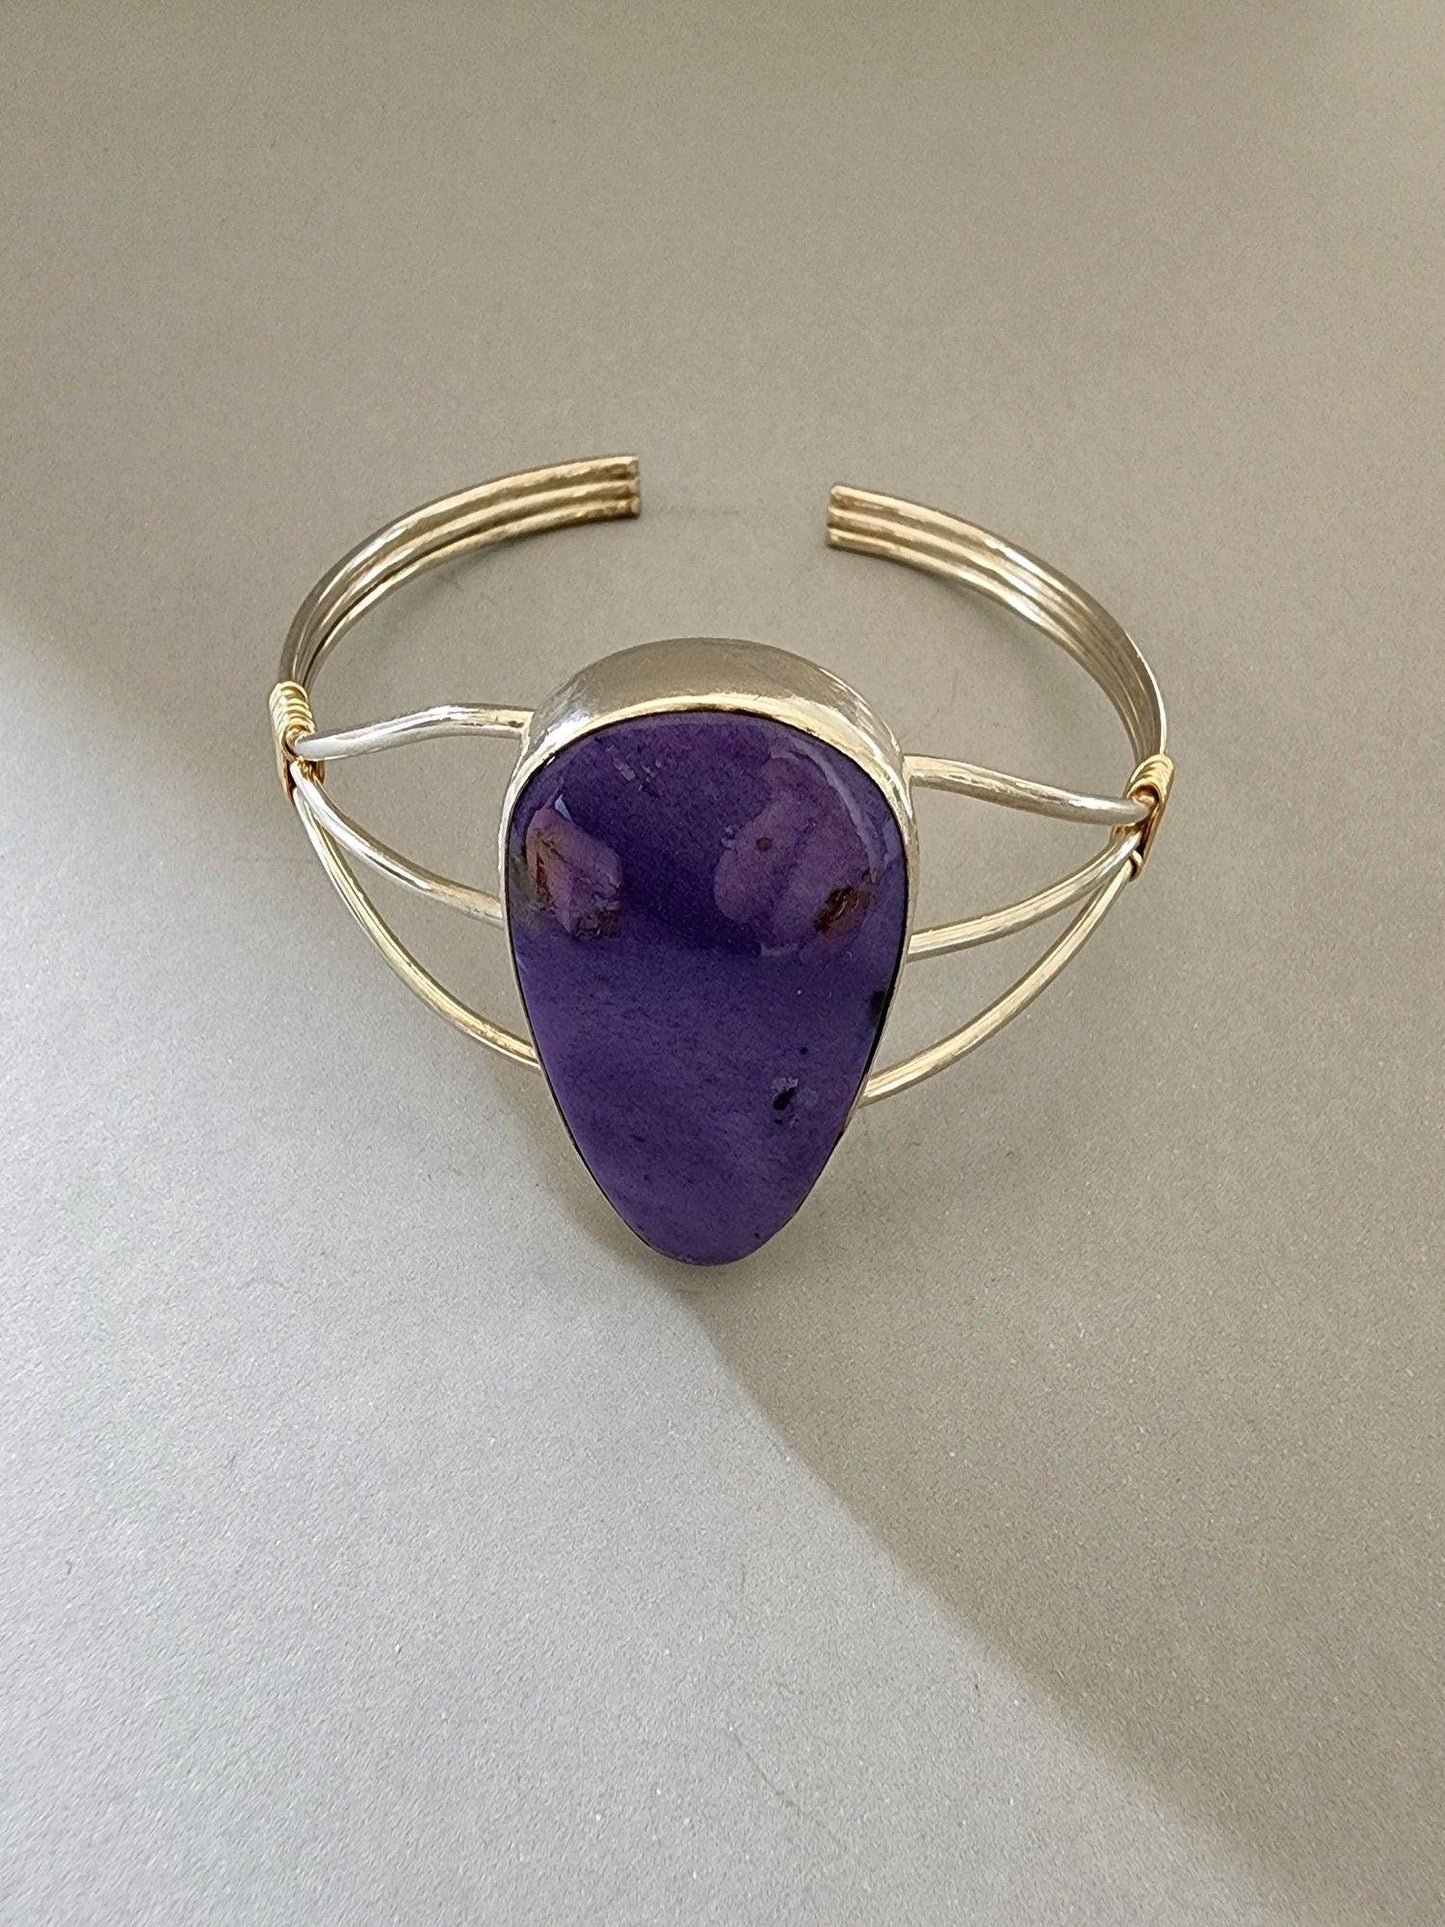 Womans Handmade Charoite and Sterling Silver Cuff Bracelet - Gilded Heart Designs